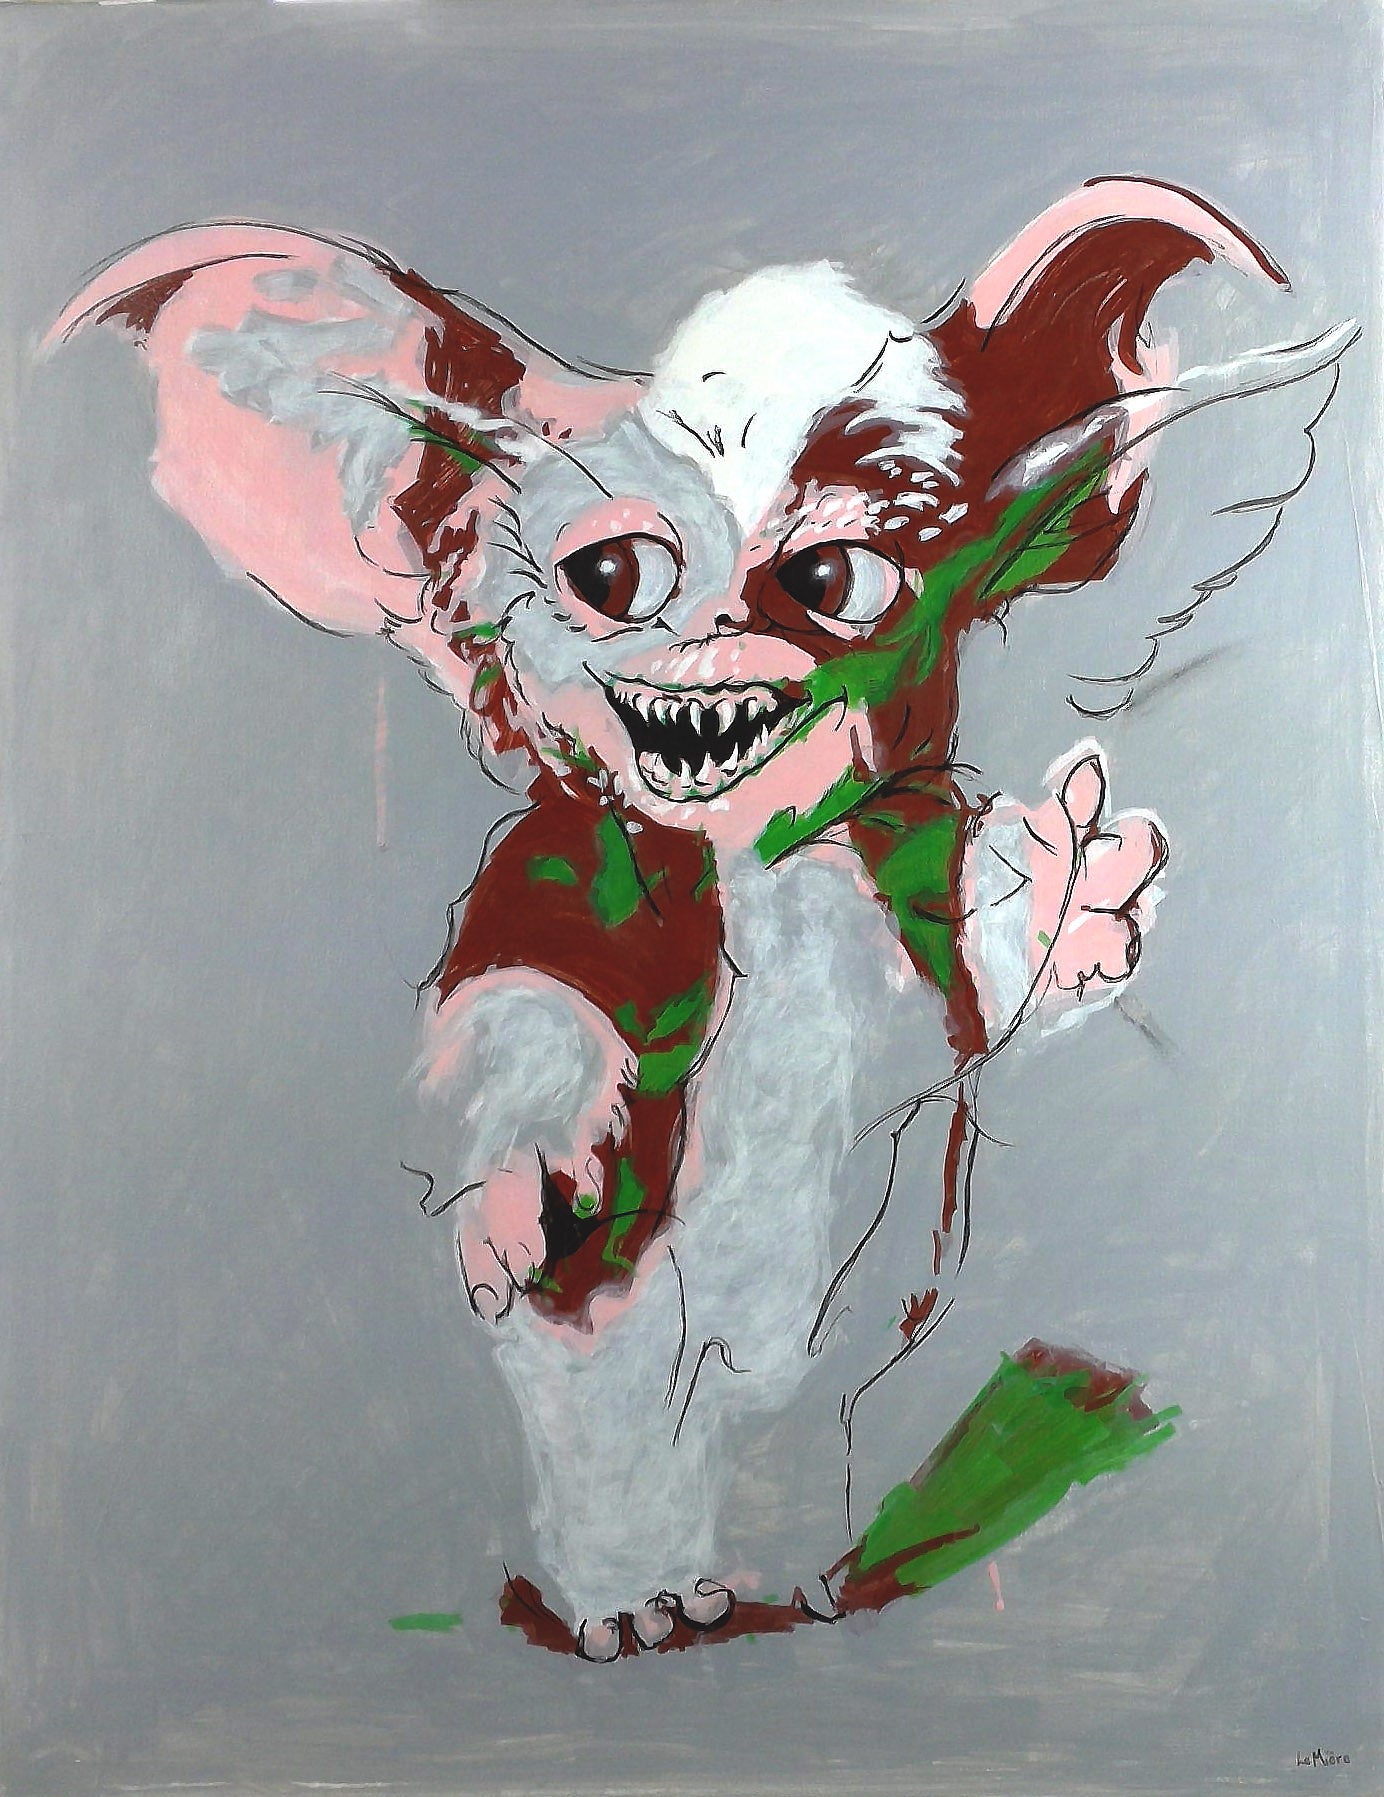 Philippe Le Miere 'horror gremlins gizmo 80s movies'